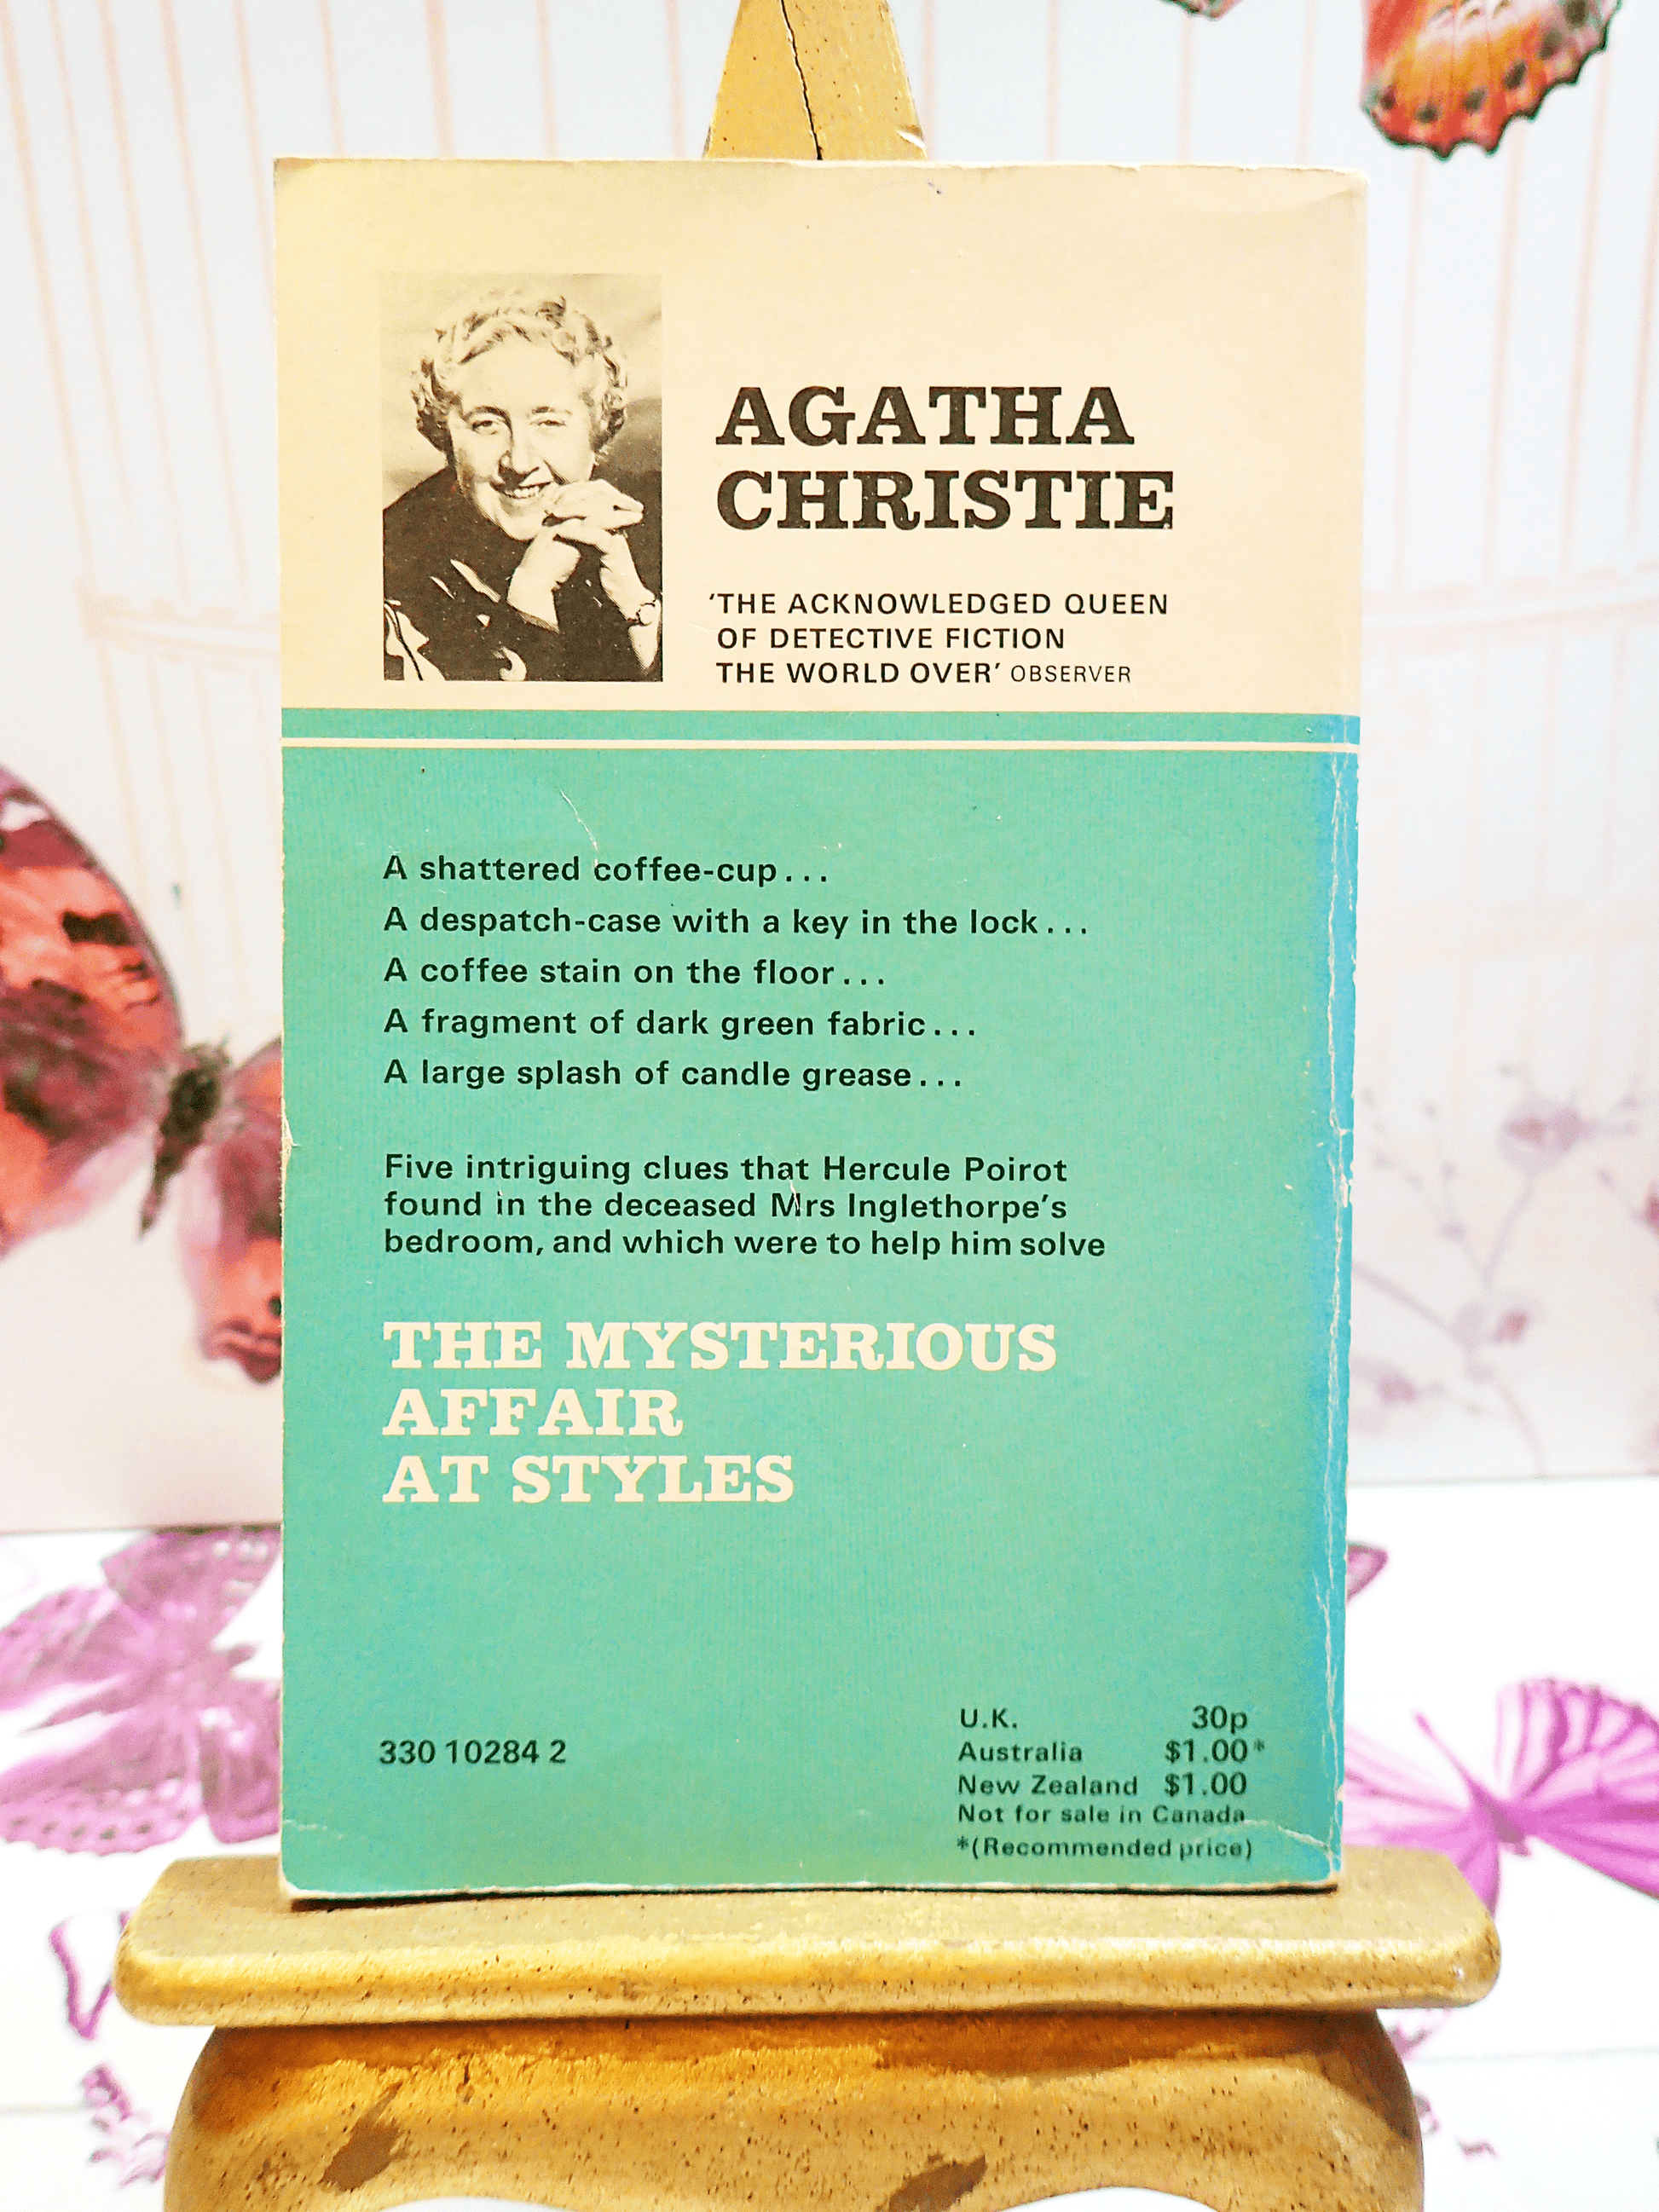 Back cover of Agatha Christie's book The Mysterious Affair at Style, Vintage Pan Paperback, showing a black and white photo of Agatha Christie with text blurb: "A shattered coffee cup..."